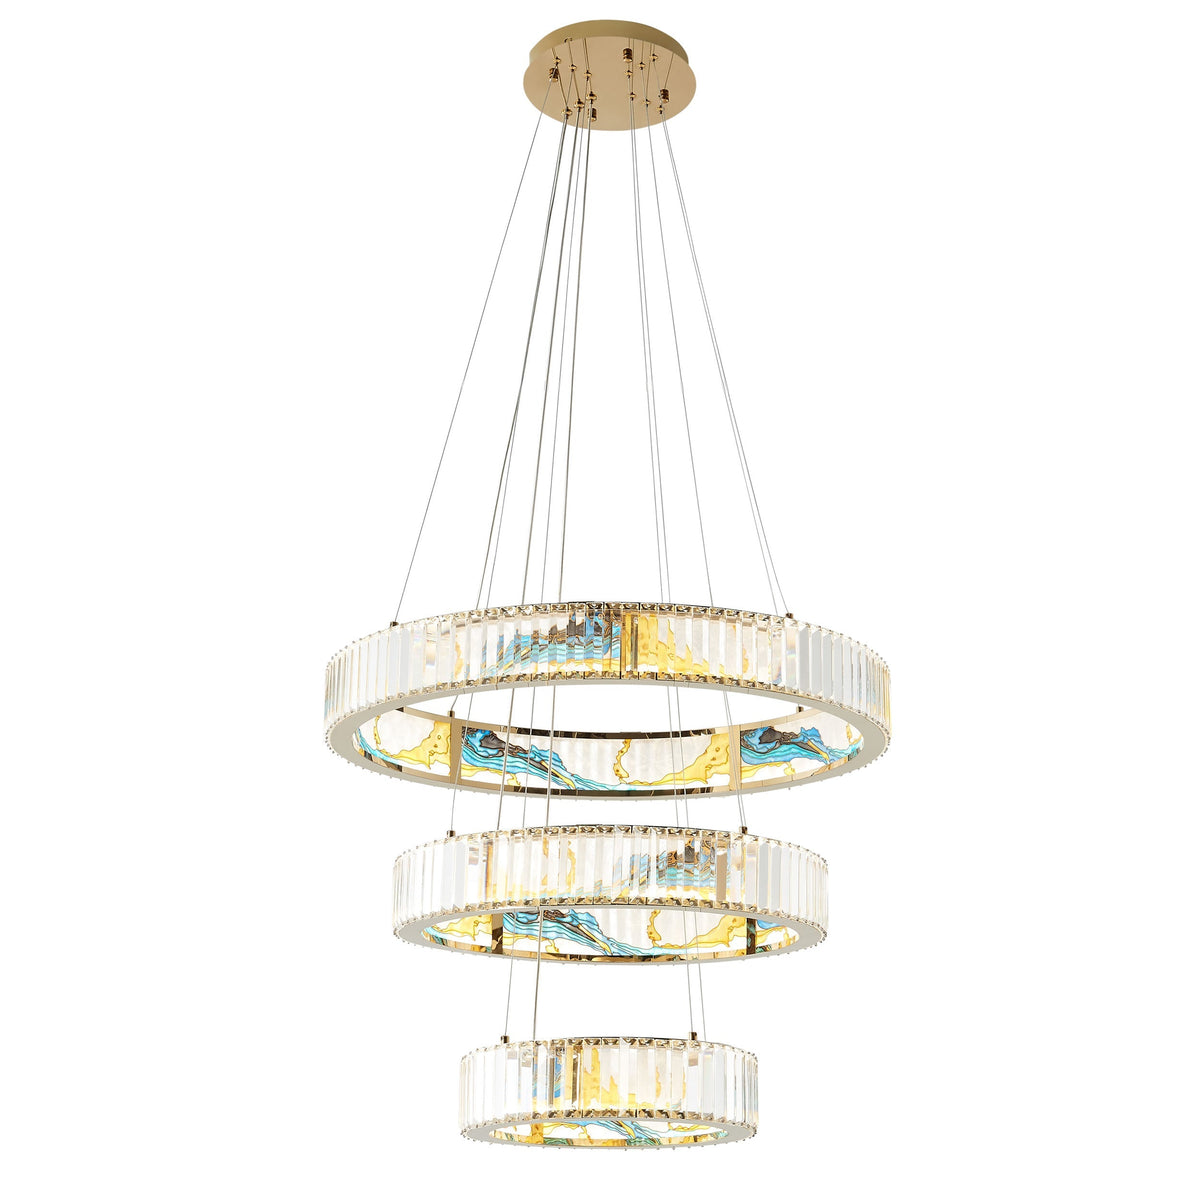 Boeseman's Colorful Chandelier - Three Tiers